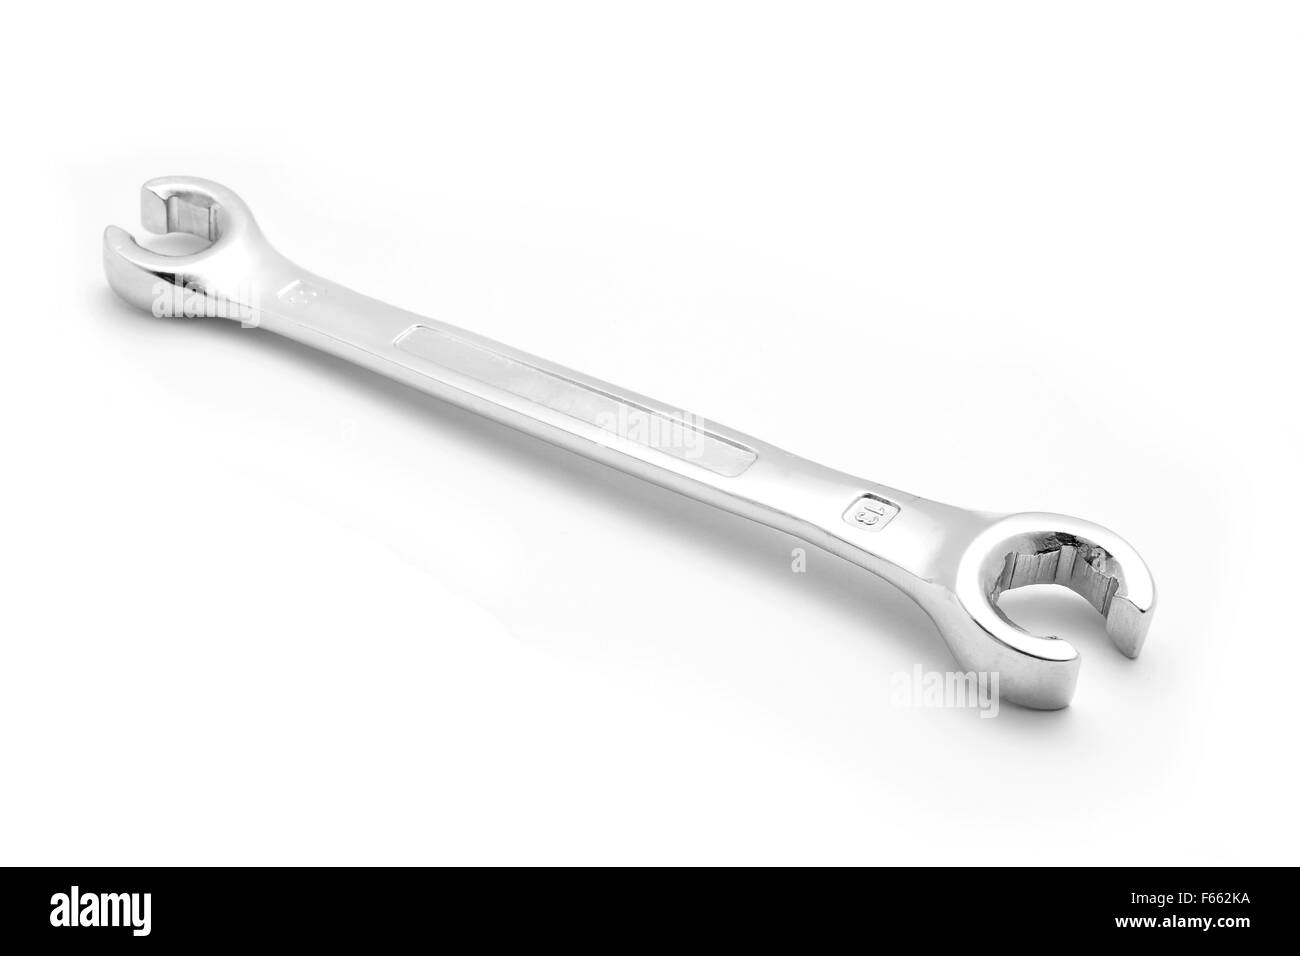 Open ring flare nut spanner Stock Photo